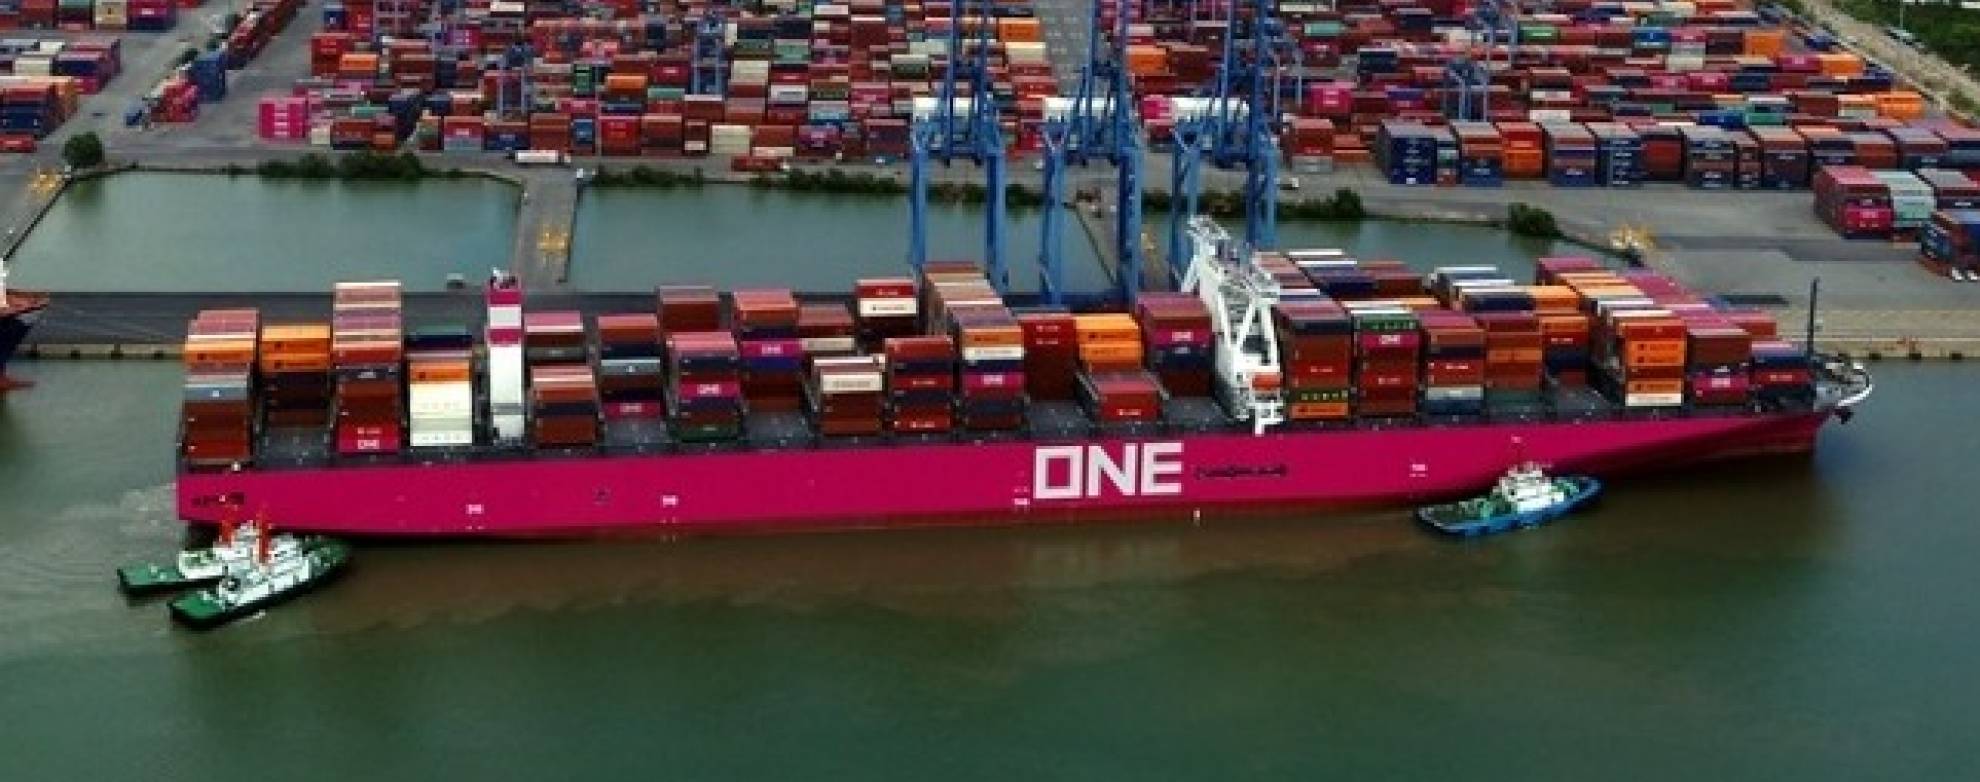 Update: One Apus container ship now back in Japan after container collapse